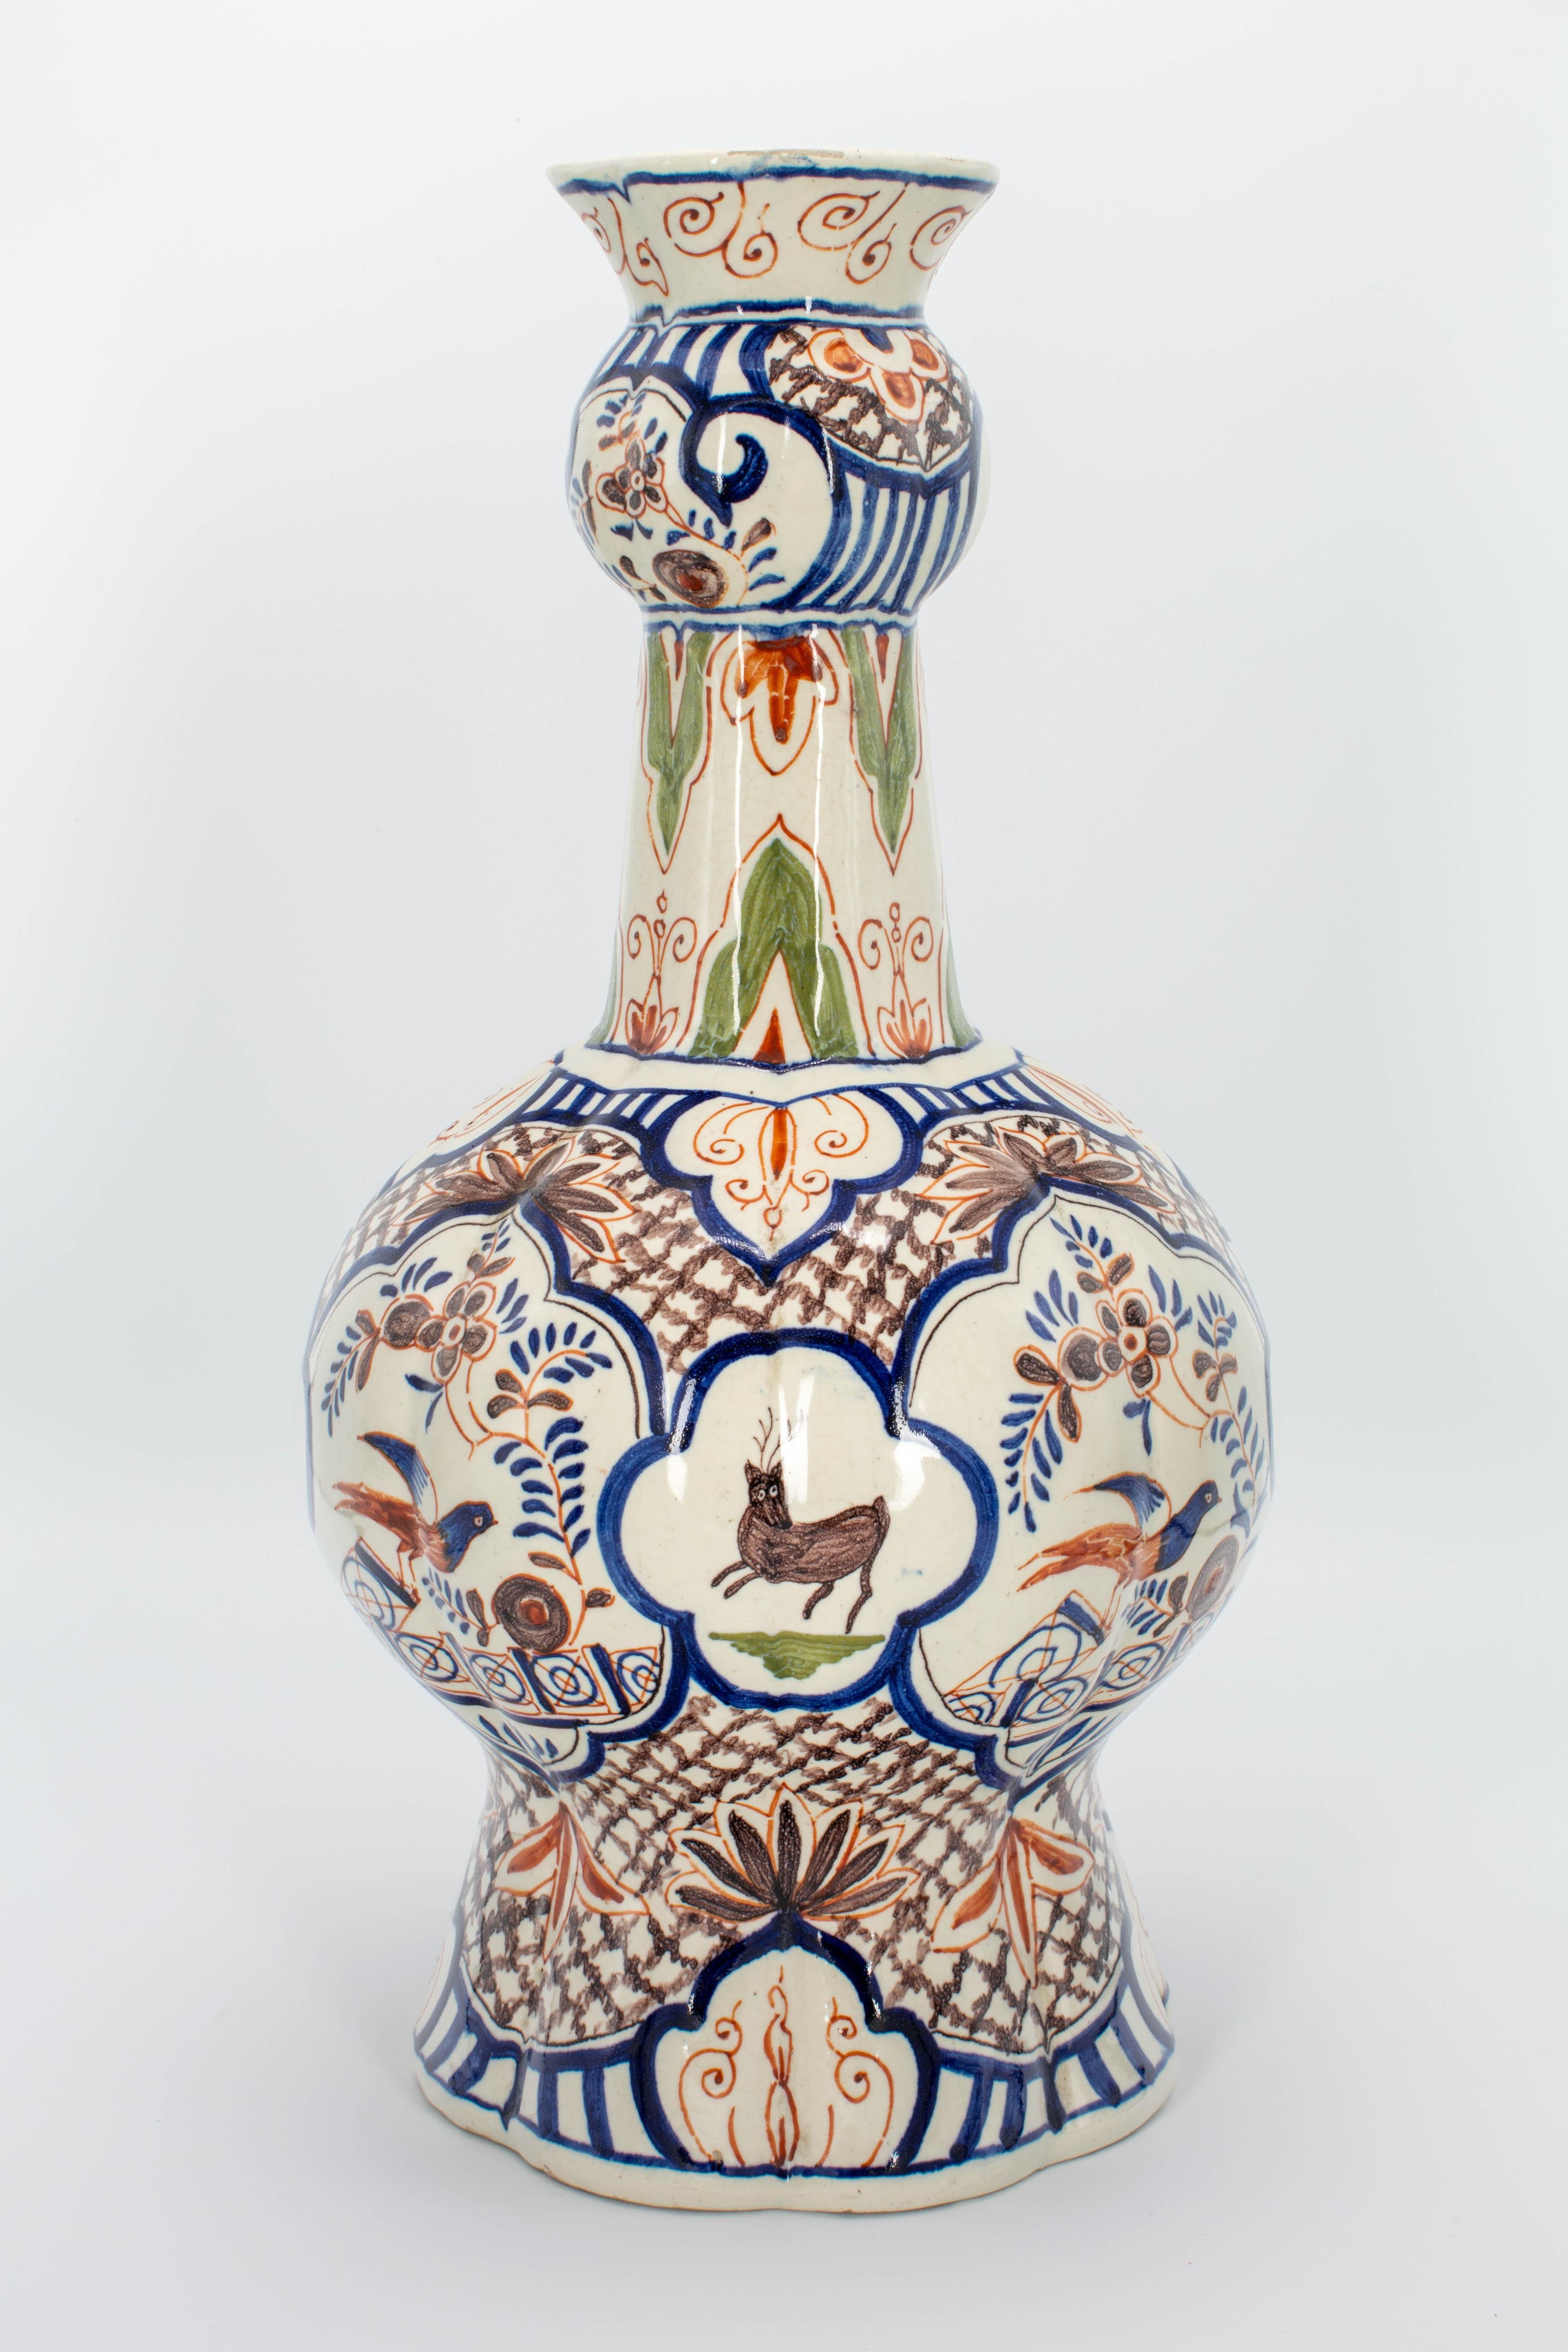 A 19th century delft faience polychrome painted vase with round body and narrow neck ending in an open bulb. Beautifully decorated in blue, orange, brown and green with large medallions framing nesting birds and reindeer. Weight: 5.6 lbs. Please